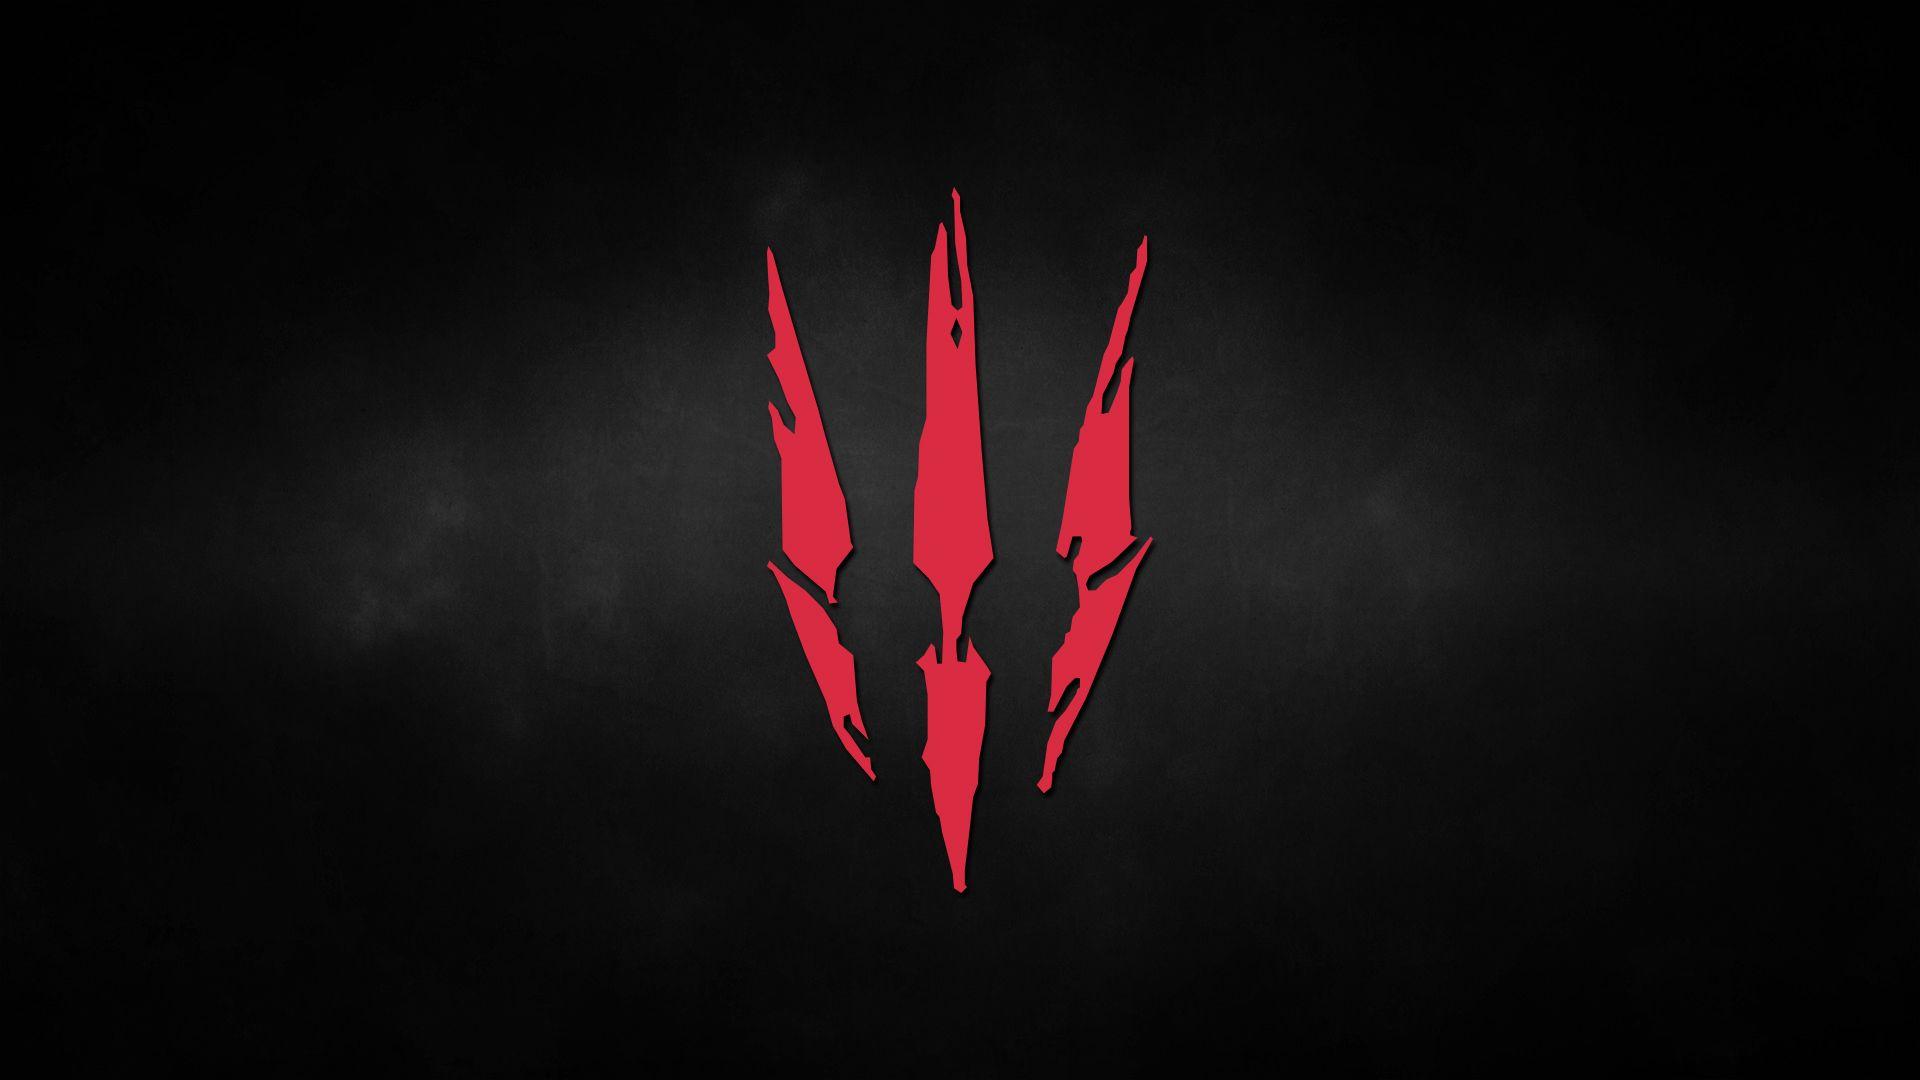 The Witcher 3 wallpaper, Picture, Image